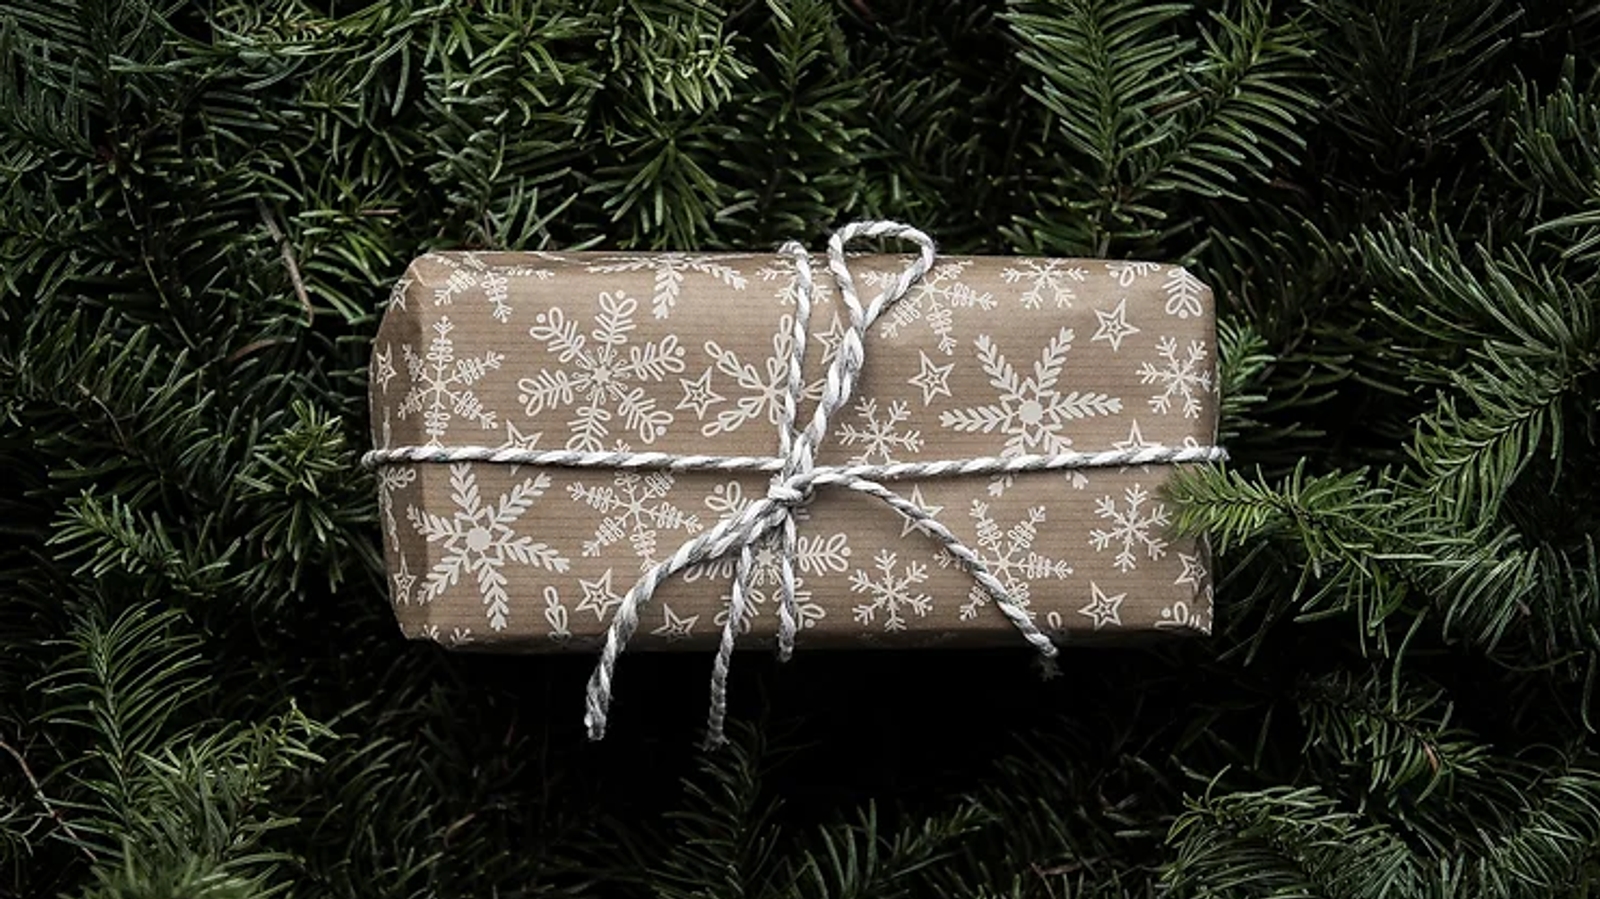 A present wrapped in brown paper with a natural twine tied in a bow, sat on top of some evergreen leaves